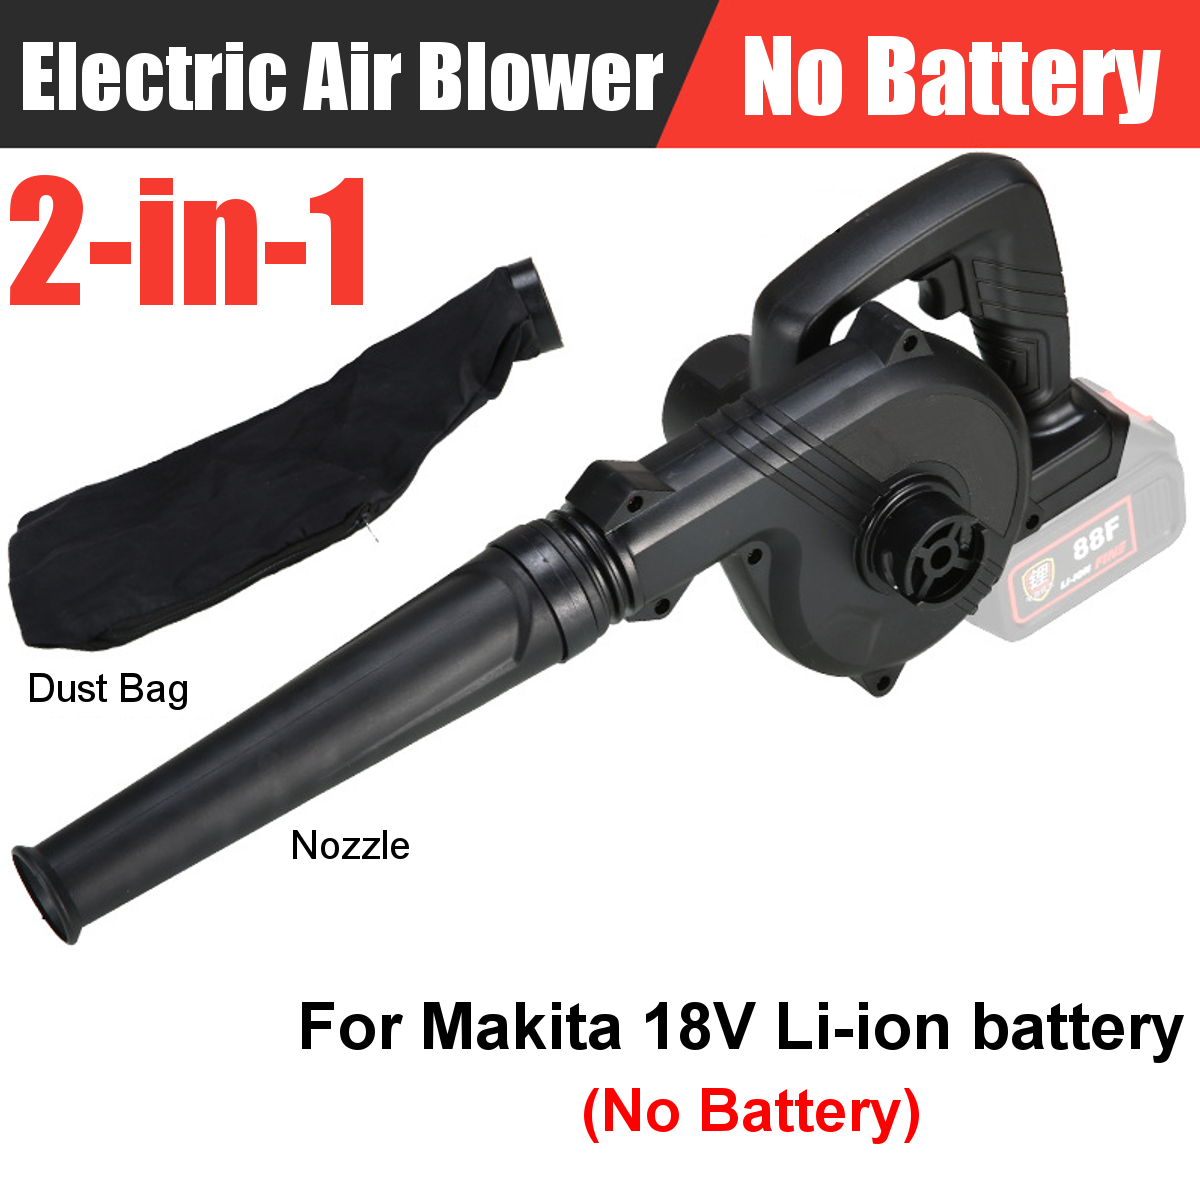 88VF-1500W-2-in-1-Electric-Air-Blower-Wireless-Vehicle-Computer-Vacuum-Dust-Collector-Leaf-Cleaner-W-1861025-4